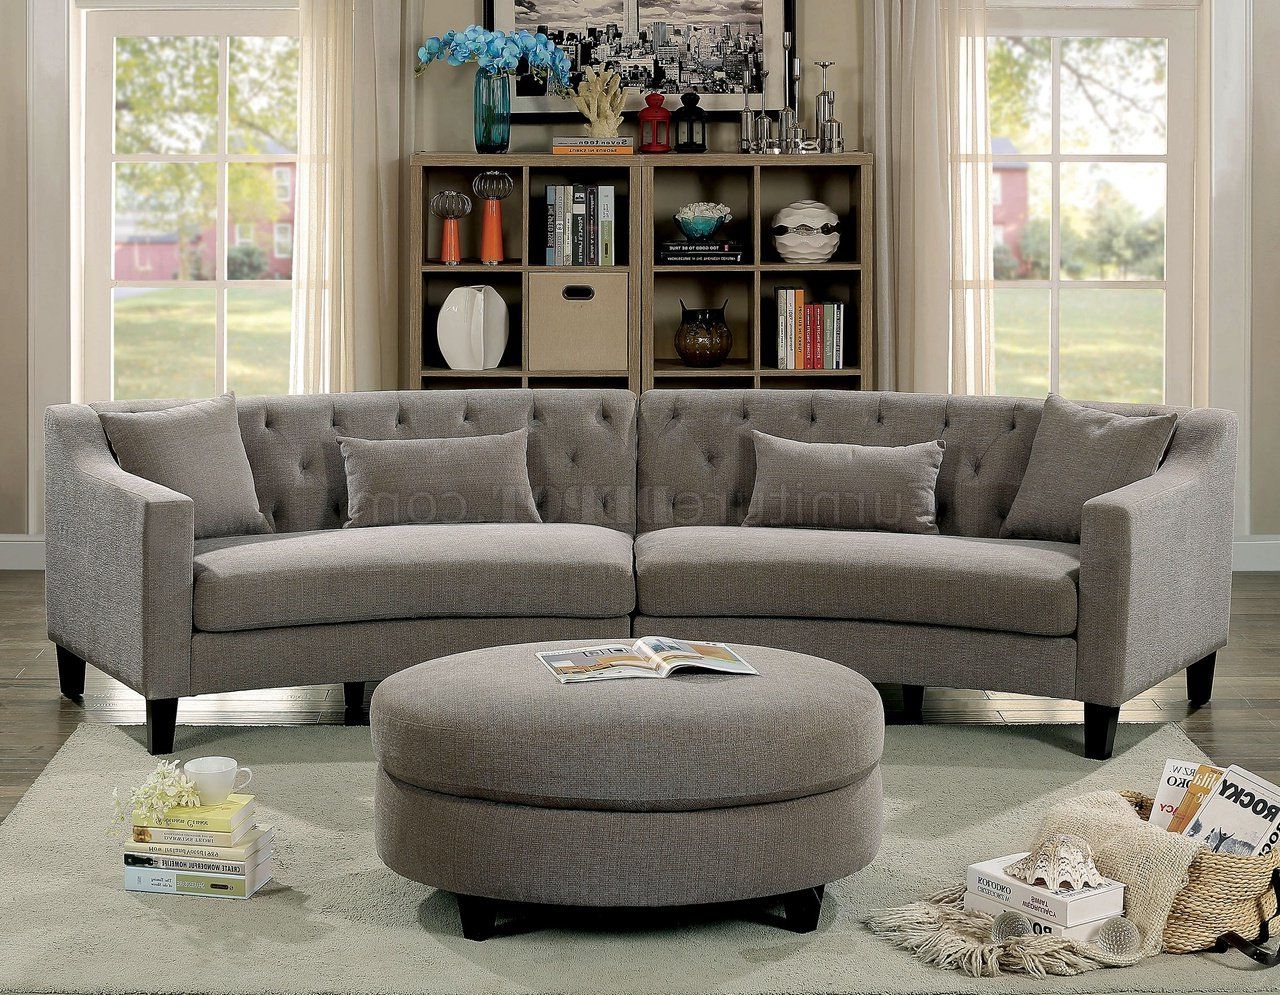 Gray Linen Sofas In Most Up To Date Sarin Sectional Sofa Cm6370 In Gray Linen Like Fabric W/options (View 14 of 15)